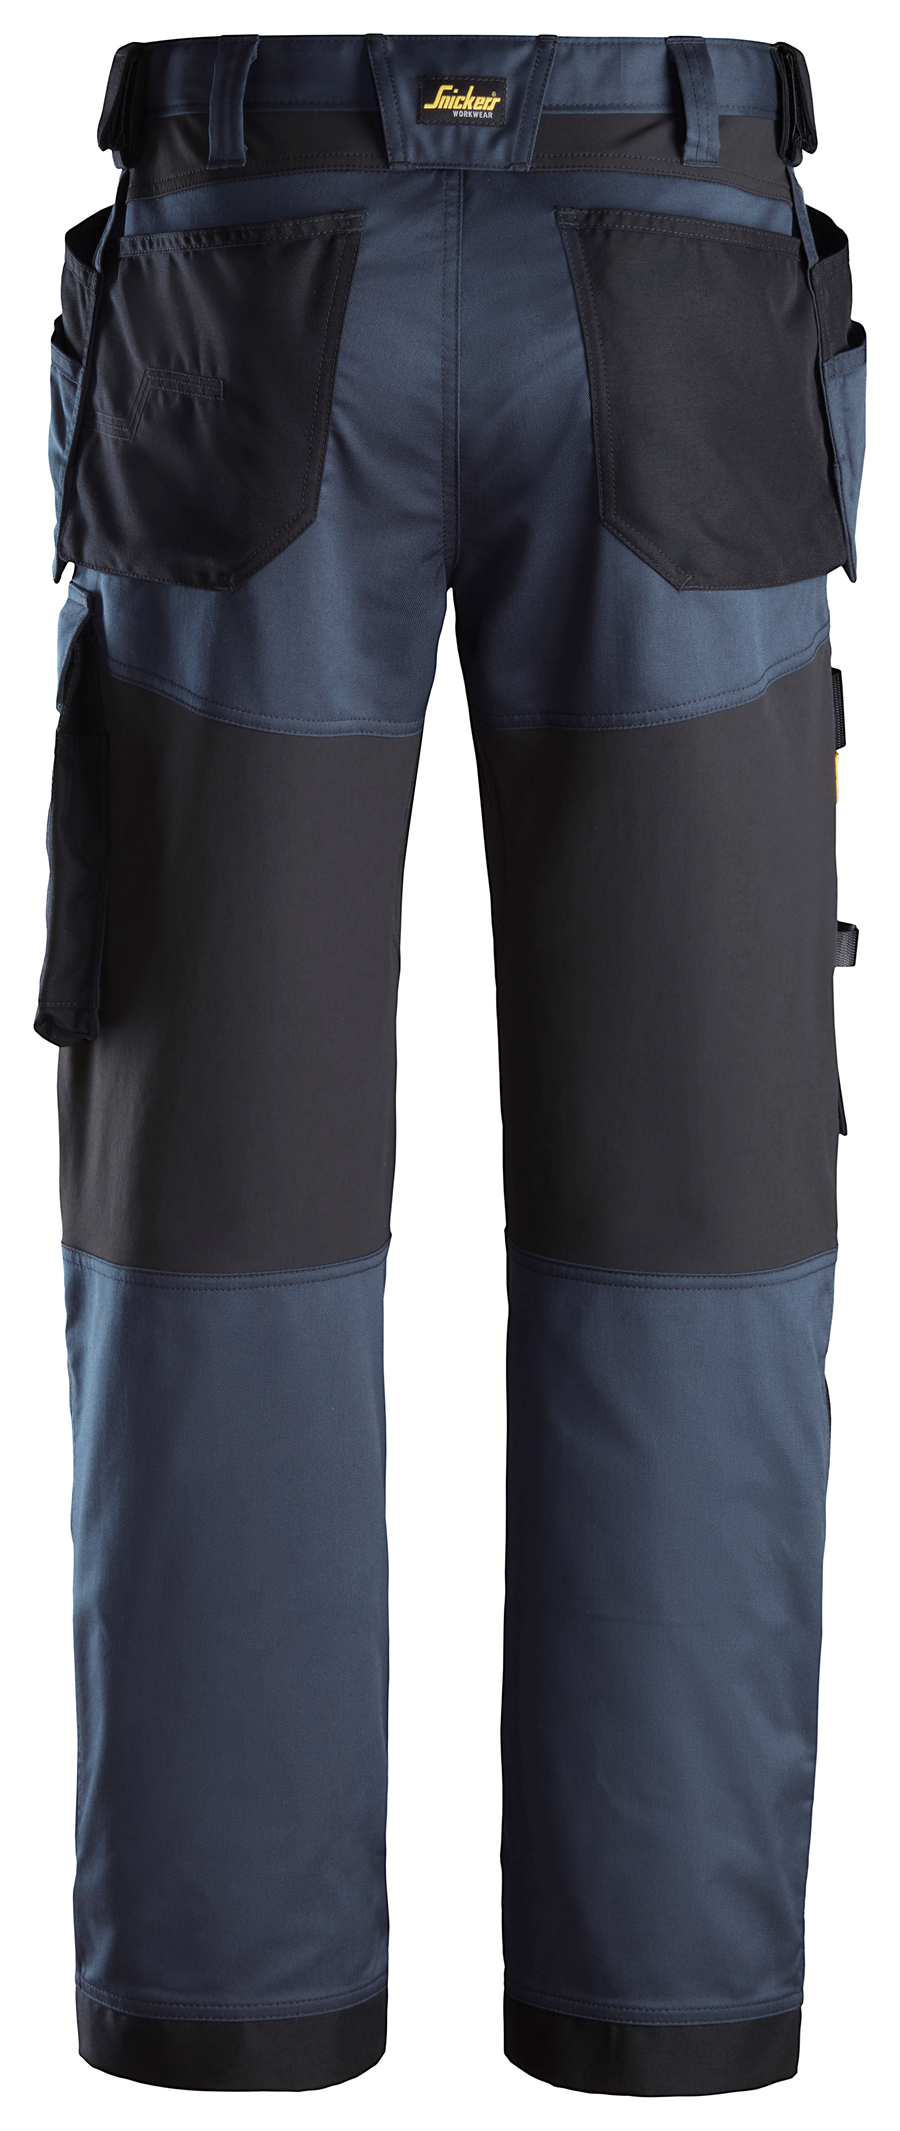 Snickers Workwear U6271 AllroundWork Full Stretch Work Pants + Holster